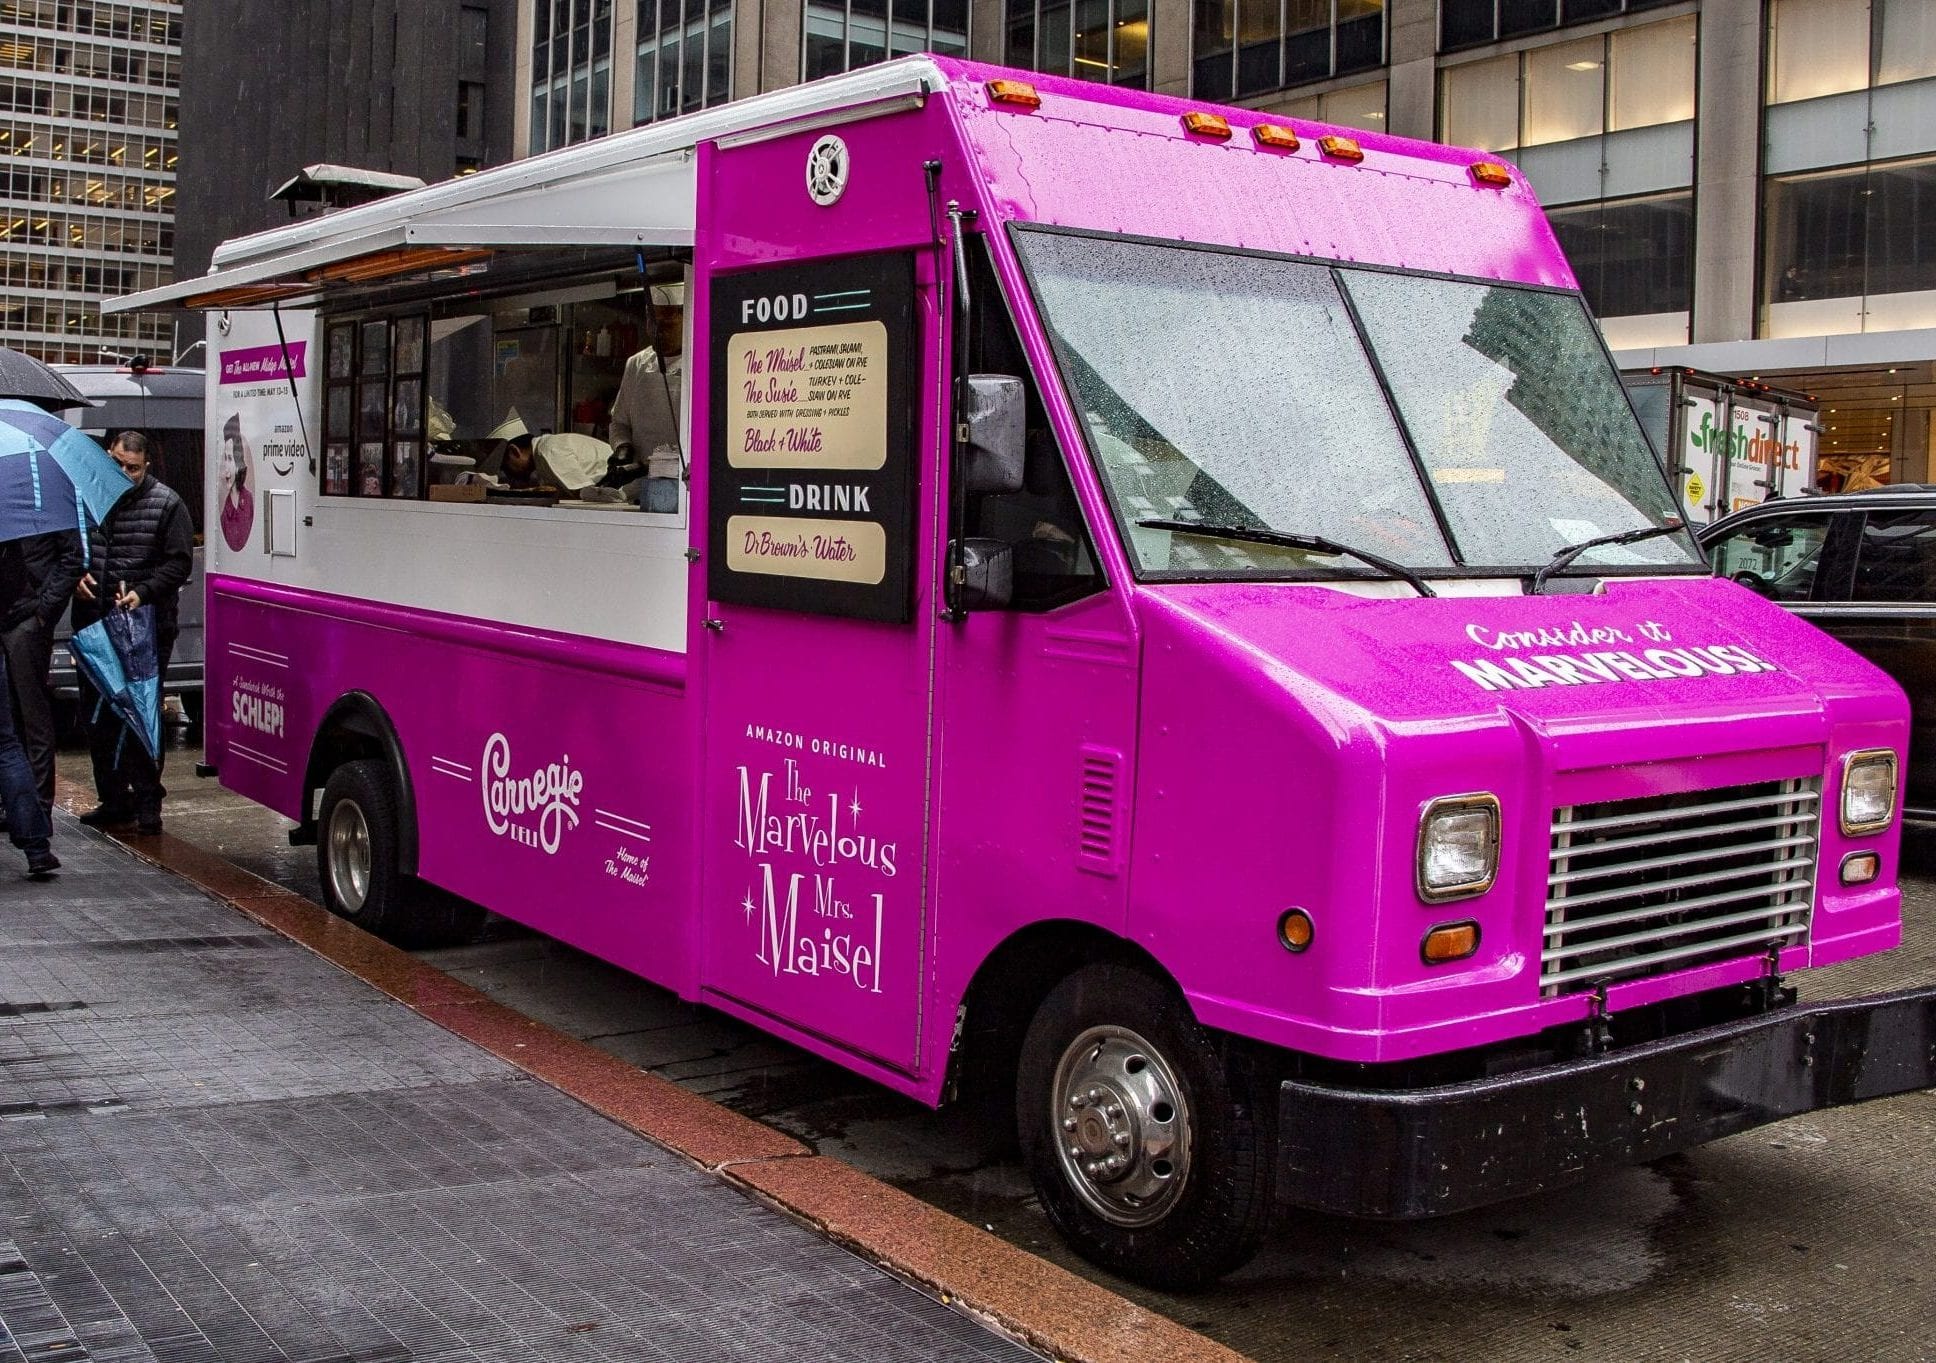 Branded food truck promotions